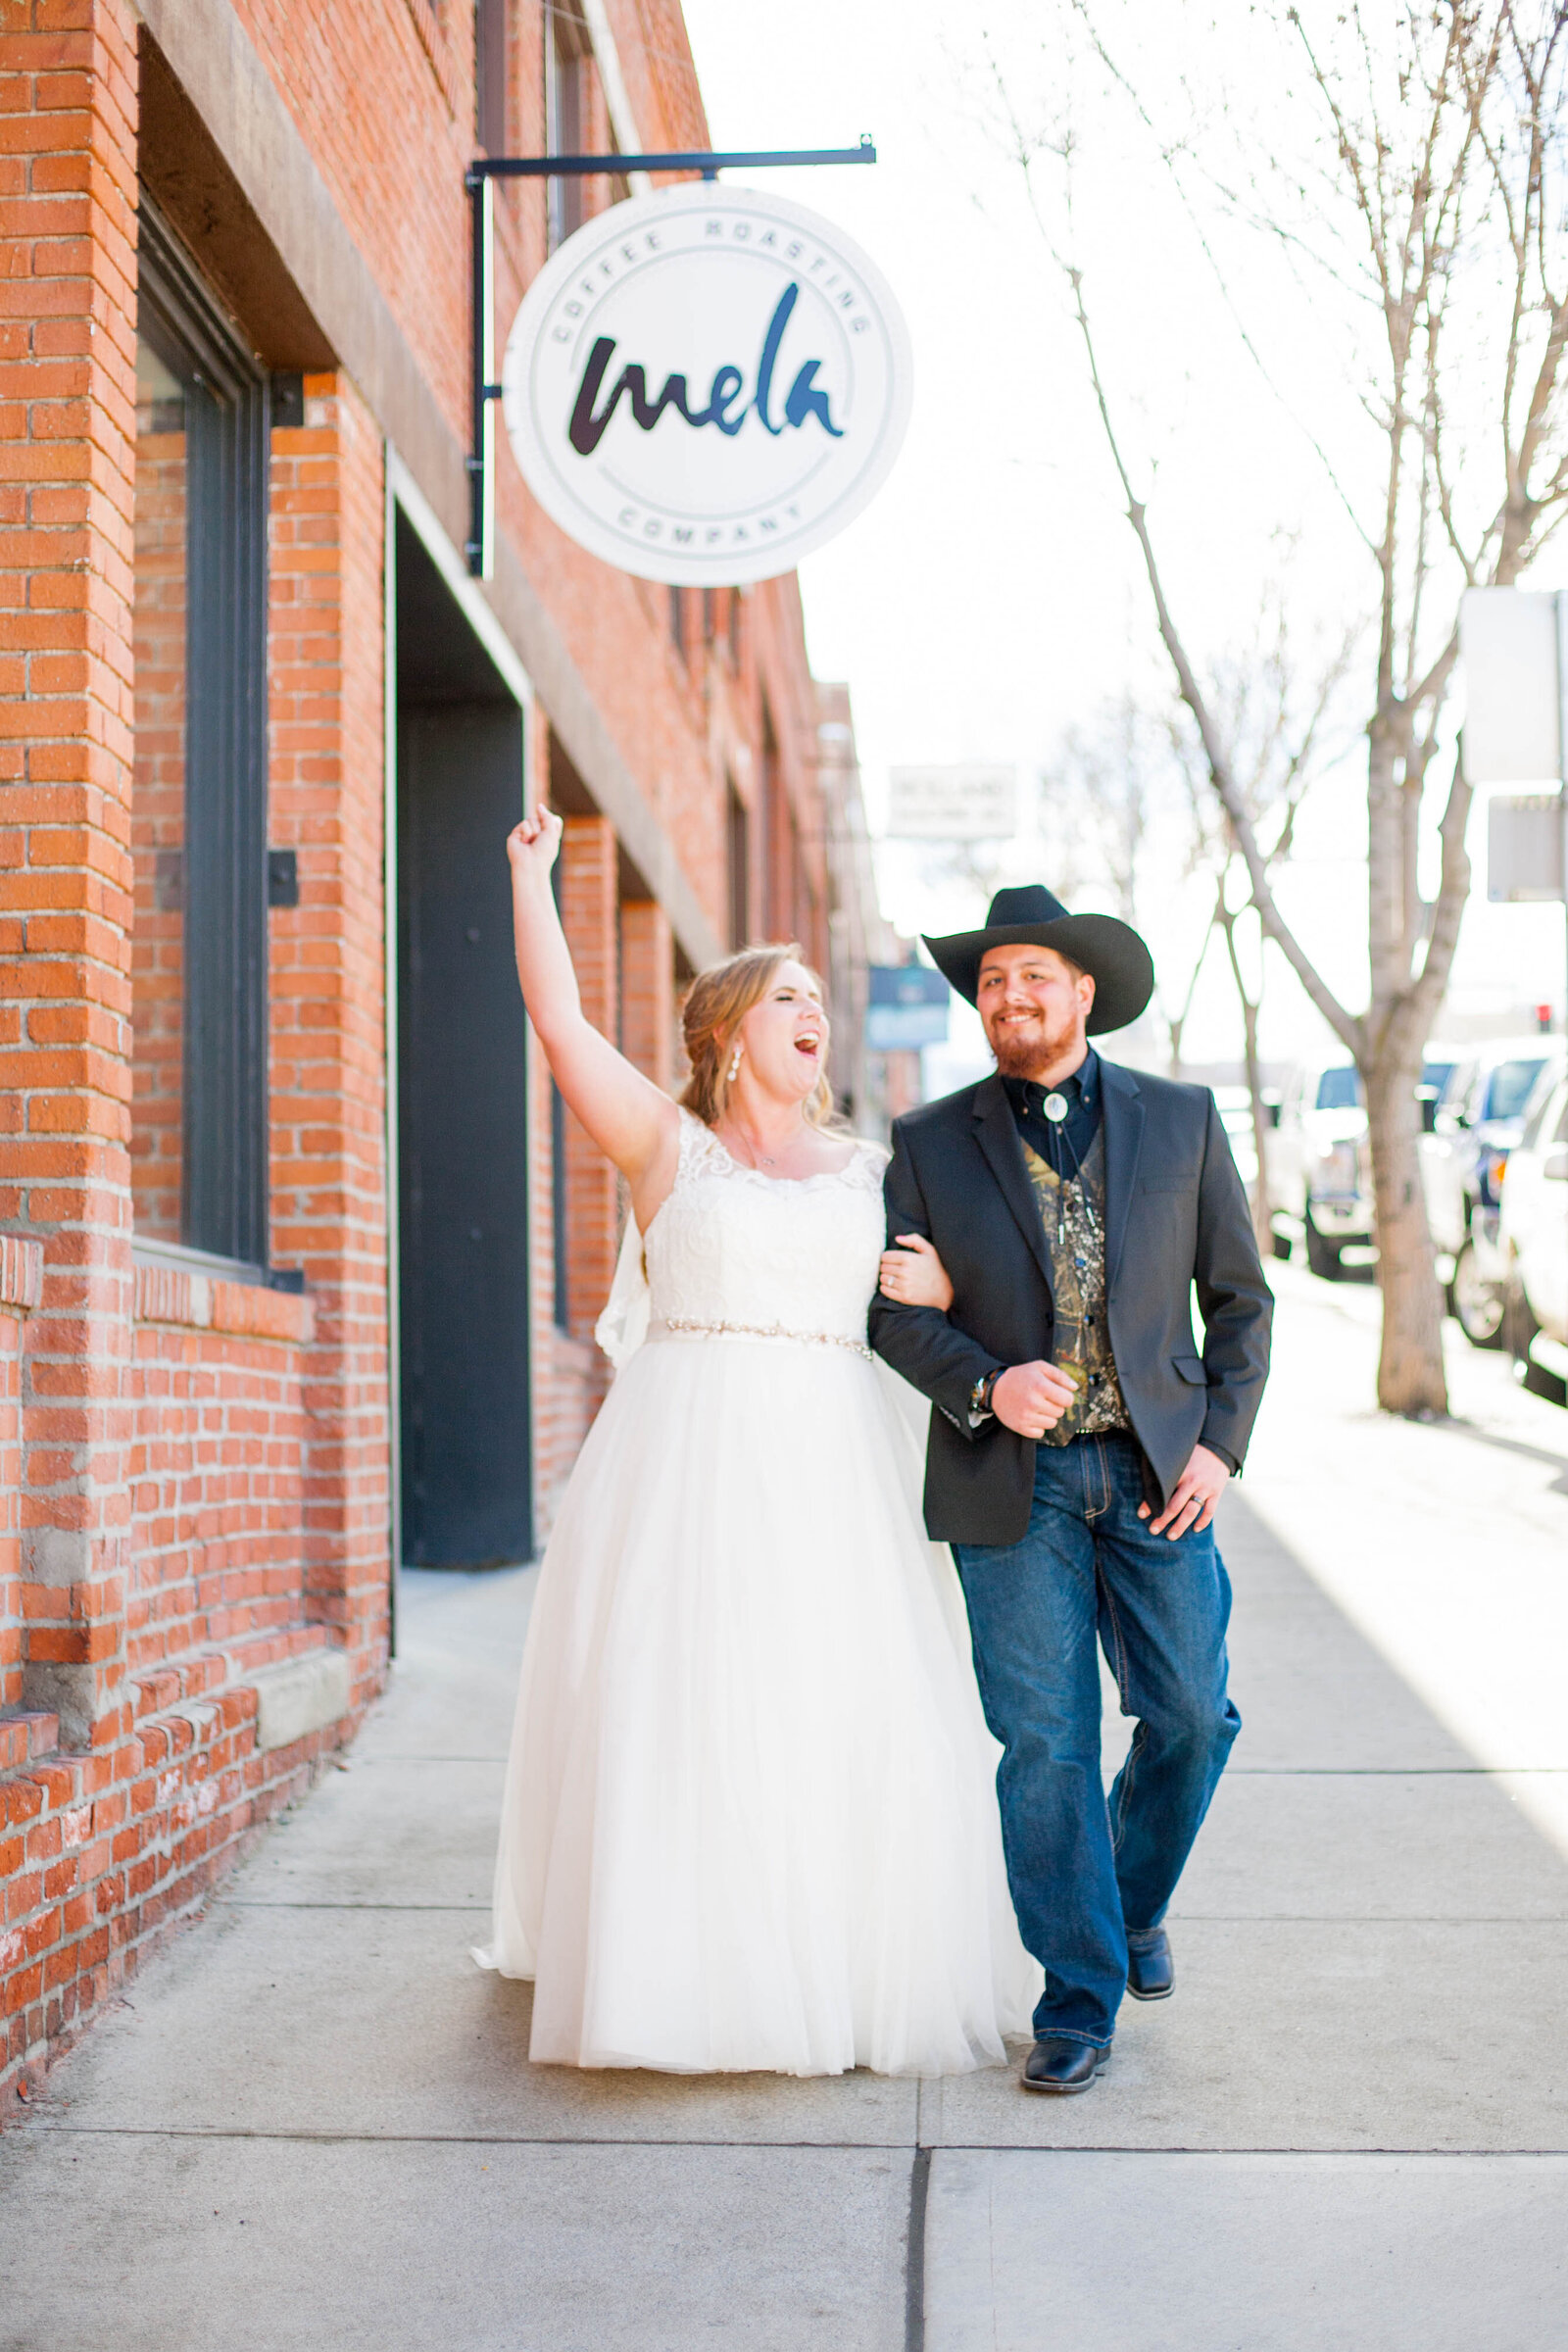 A Leavenworth wedding photography shoot with a man and woman walking downtown.